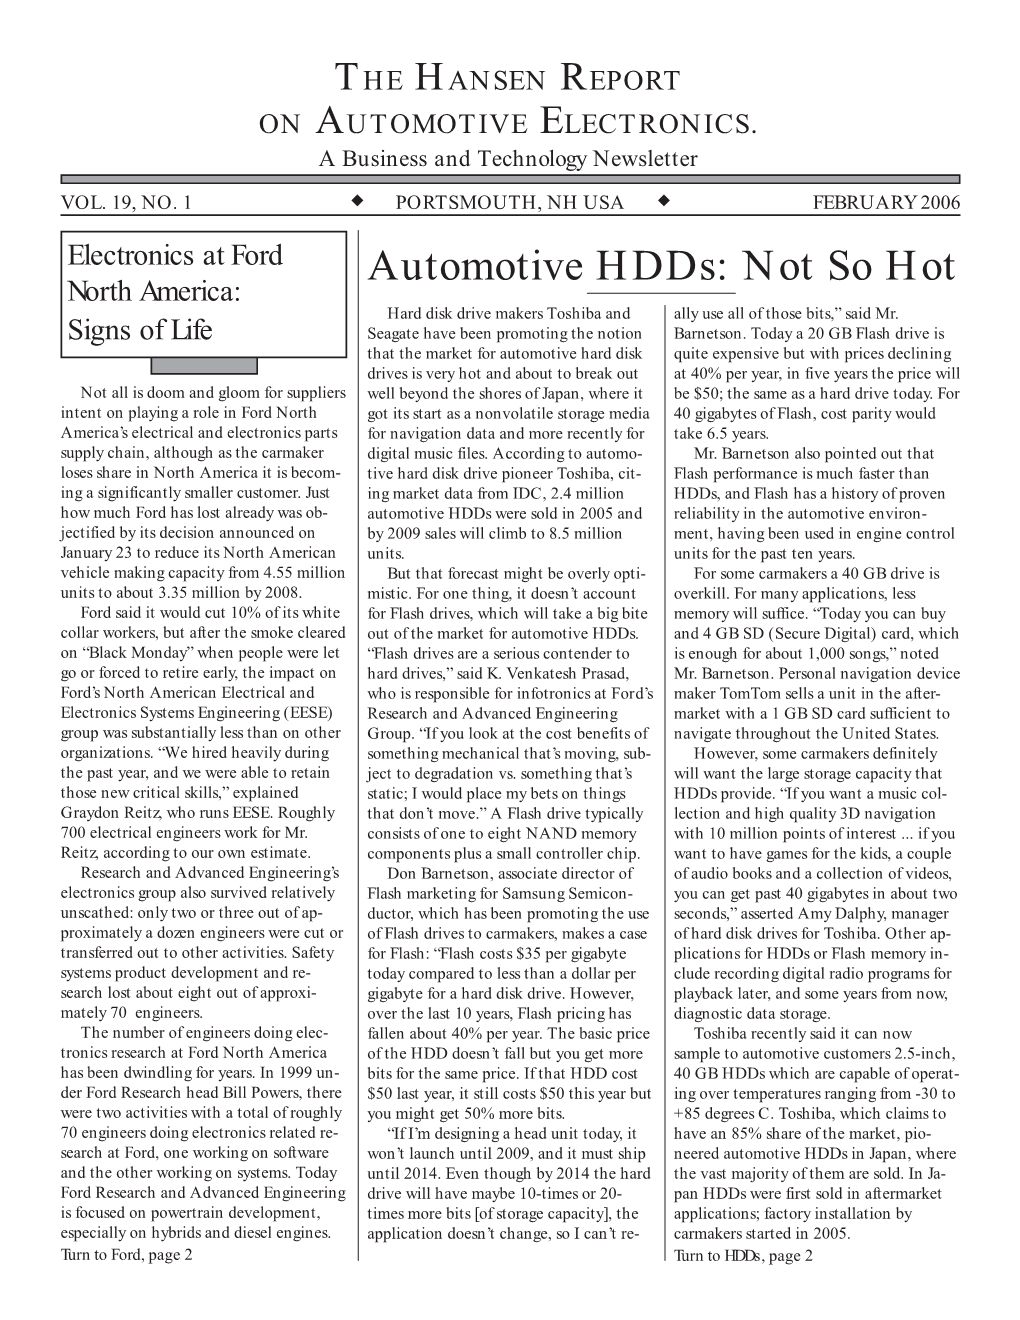 Automotive Hdds: Not So Hot North America: Hard Disk Drive Makers Toshiba and Ally Use All of Those Bits,” Said Mr